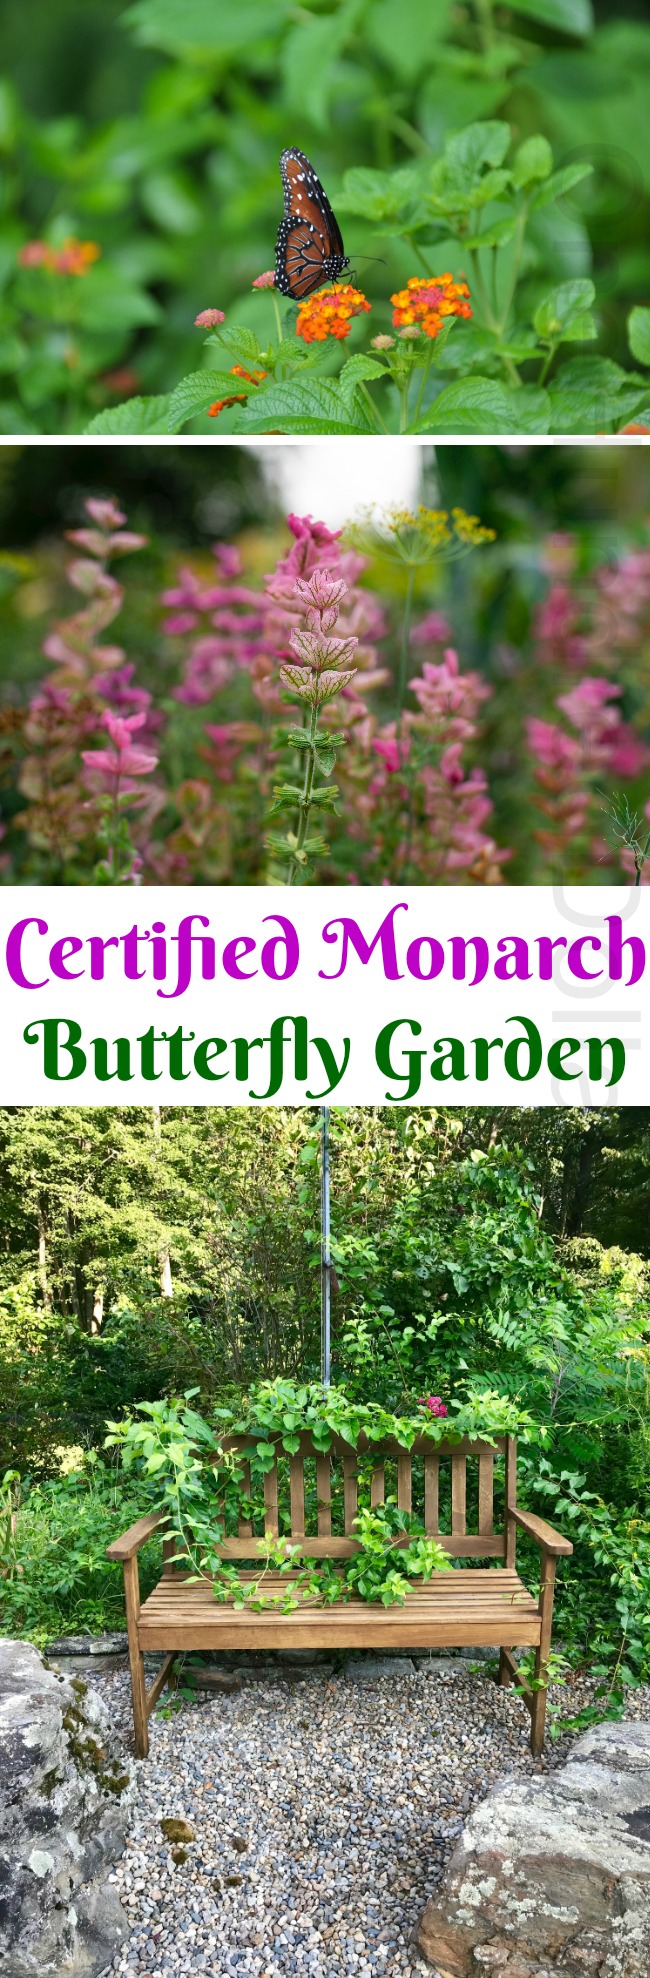 Mavis Mail – Kim From Michigan Sends in Pics of her Certified Monarch Butterfly Garden